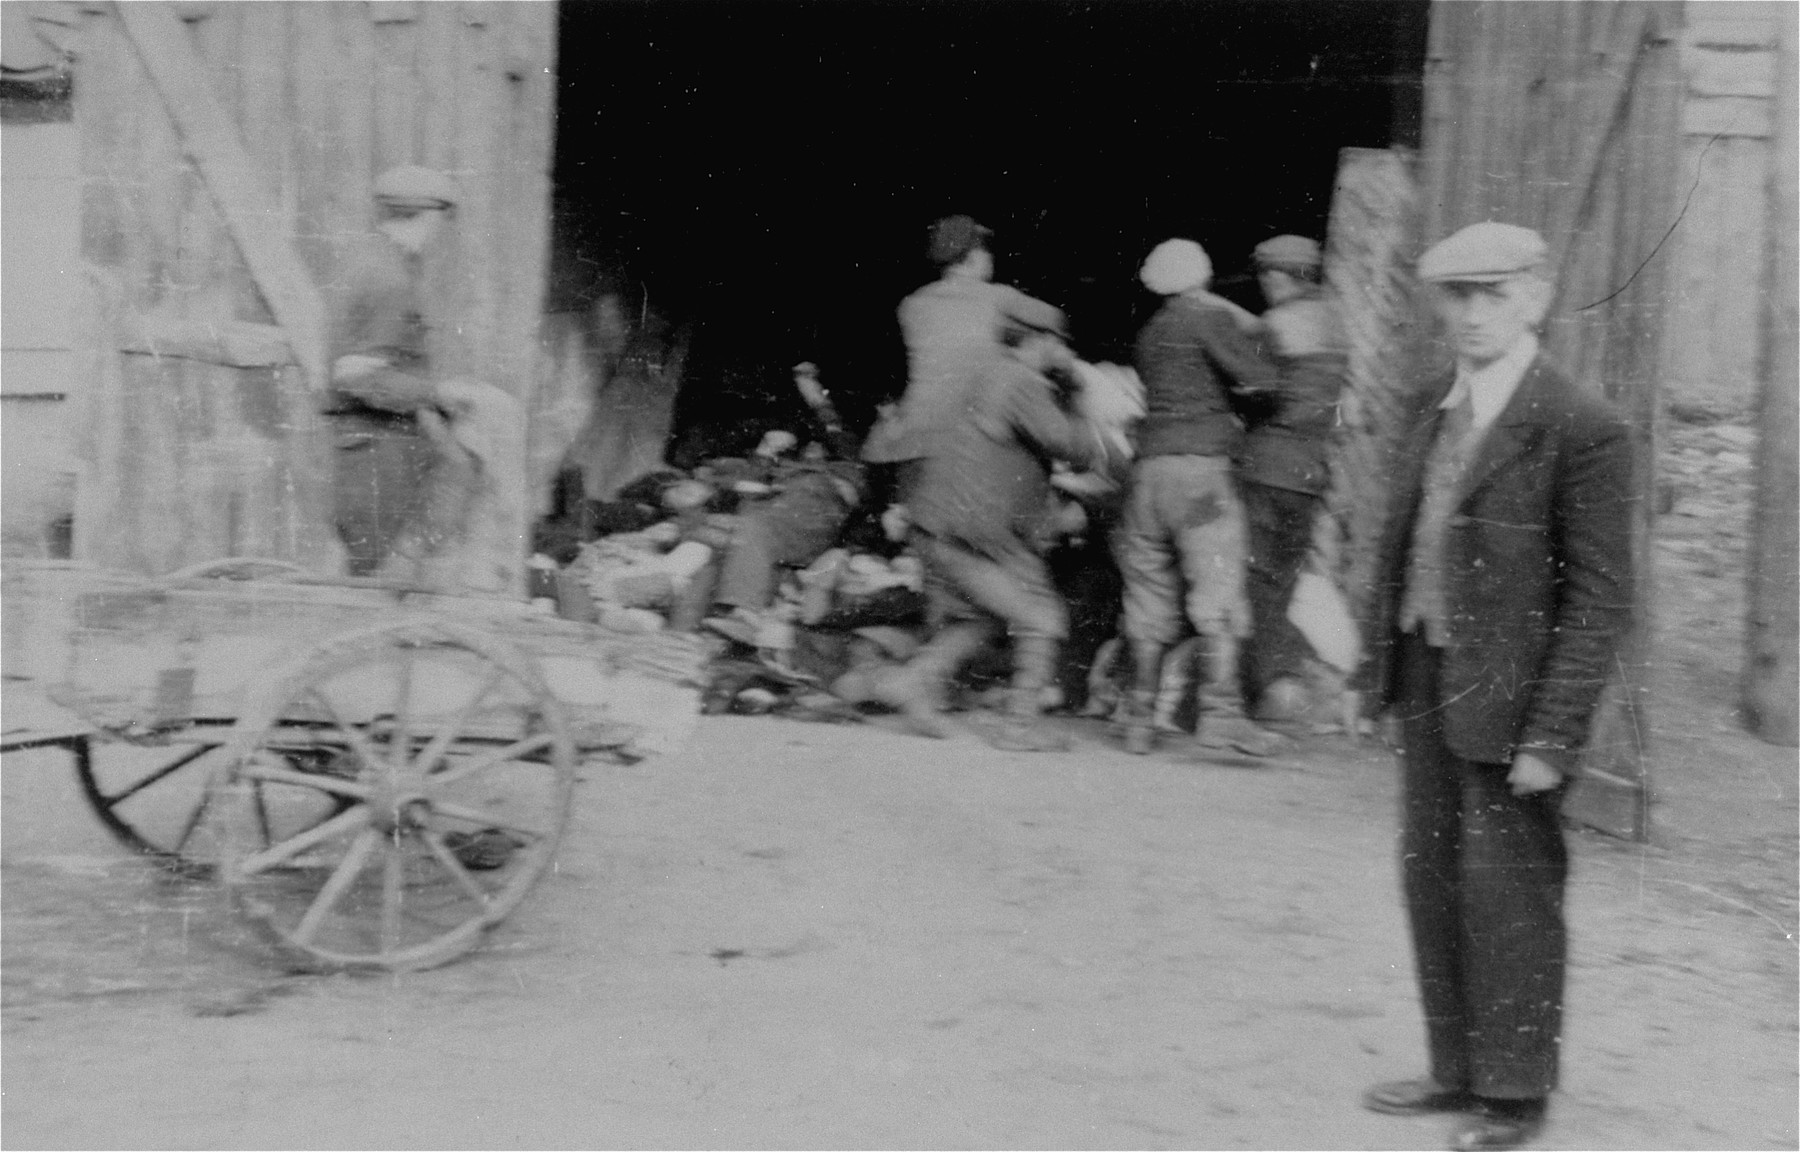 A Jewish council official named Kaminski (in the foreground) watches as men remove corpses from a cart and pile them in a barn in the Deblin Irena ghetto.